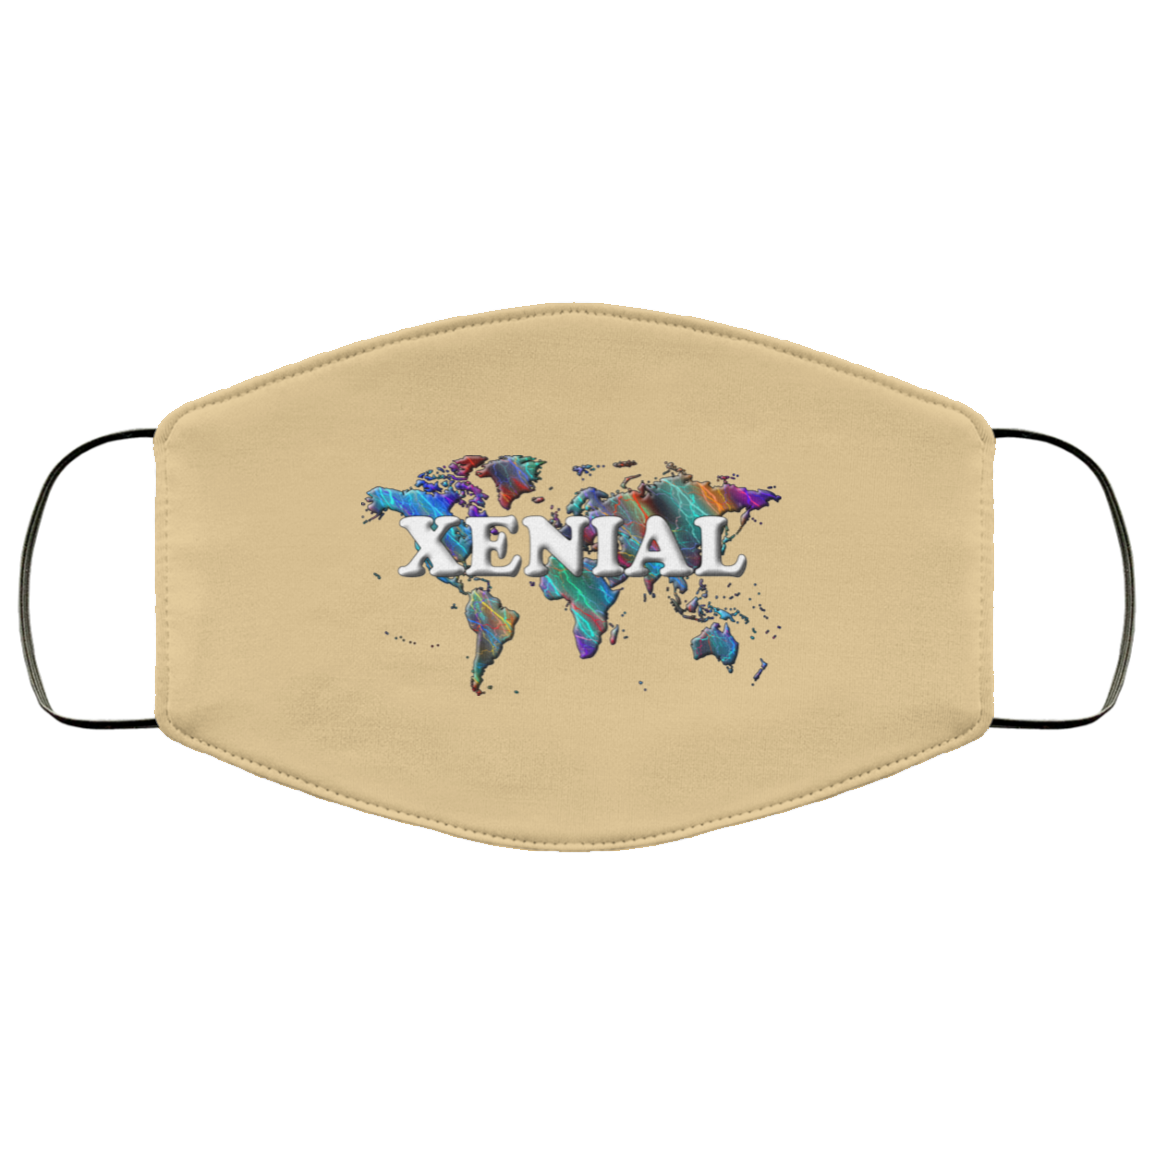 Xenial 2 Layer Protective Mask